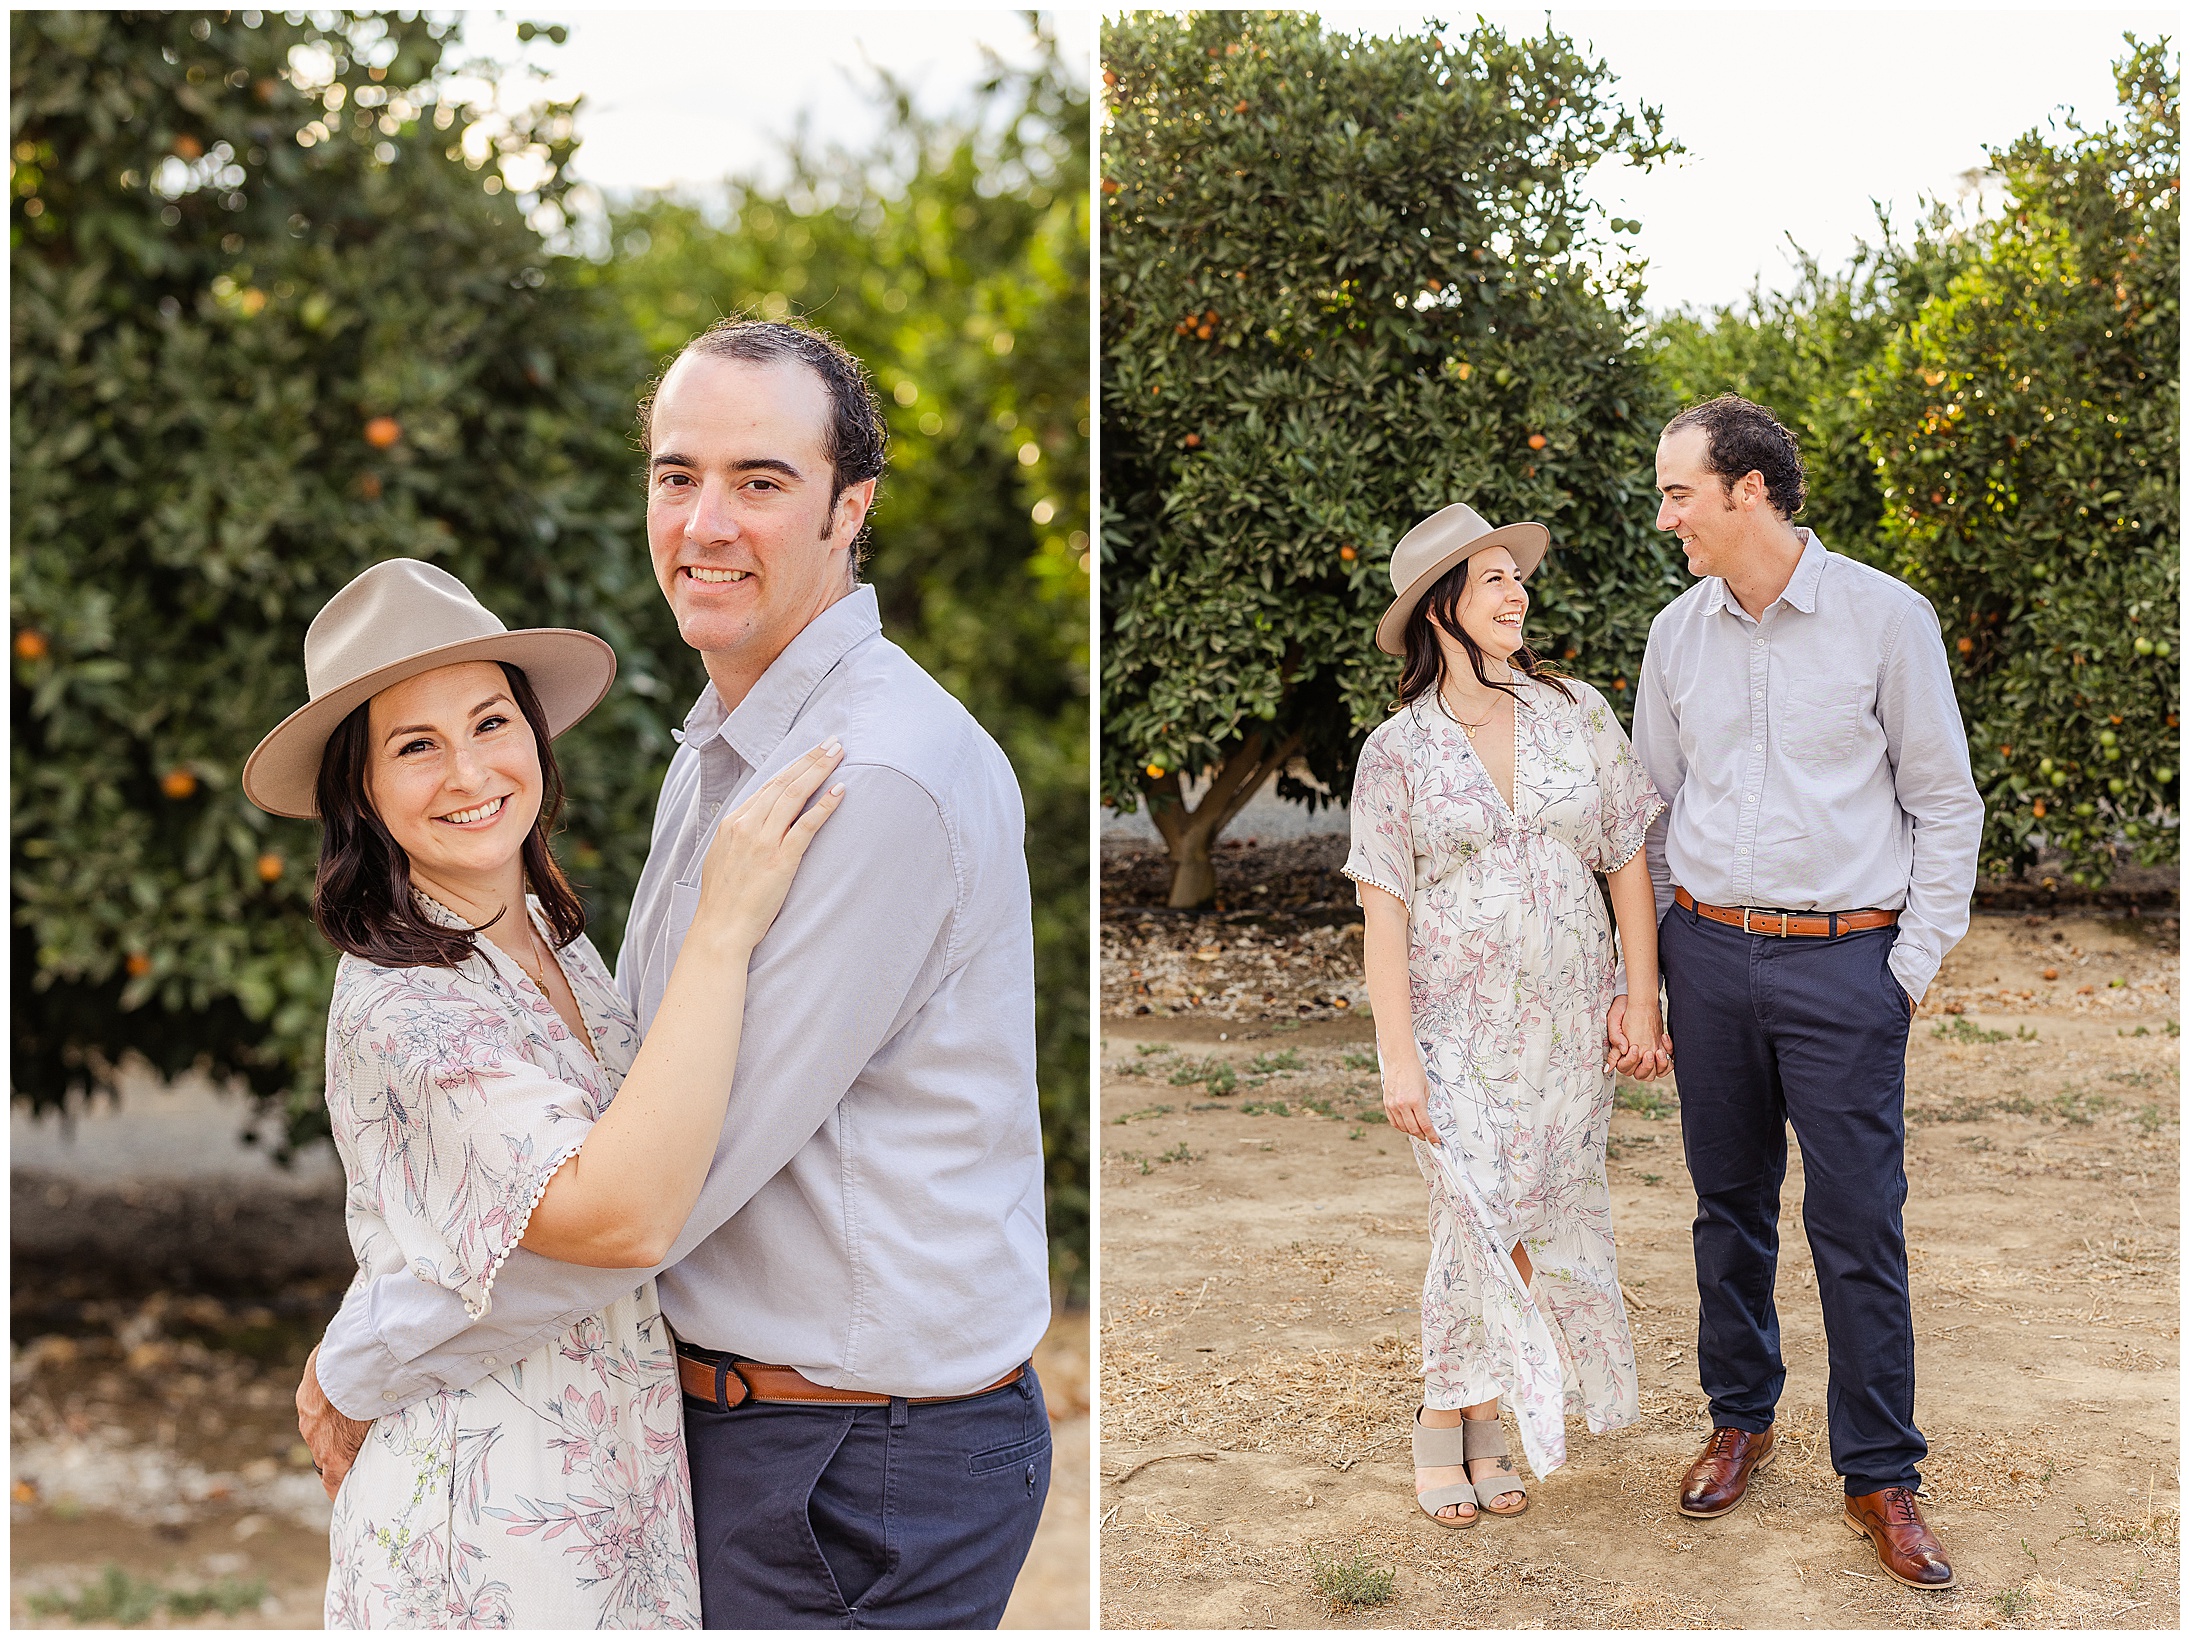 Orange Orchard Grove Extended Family Session Orland CA Orange Trees,